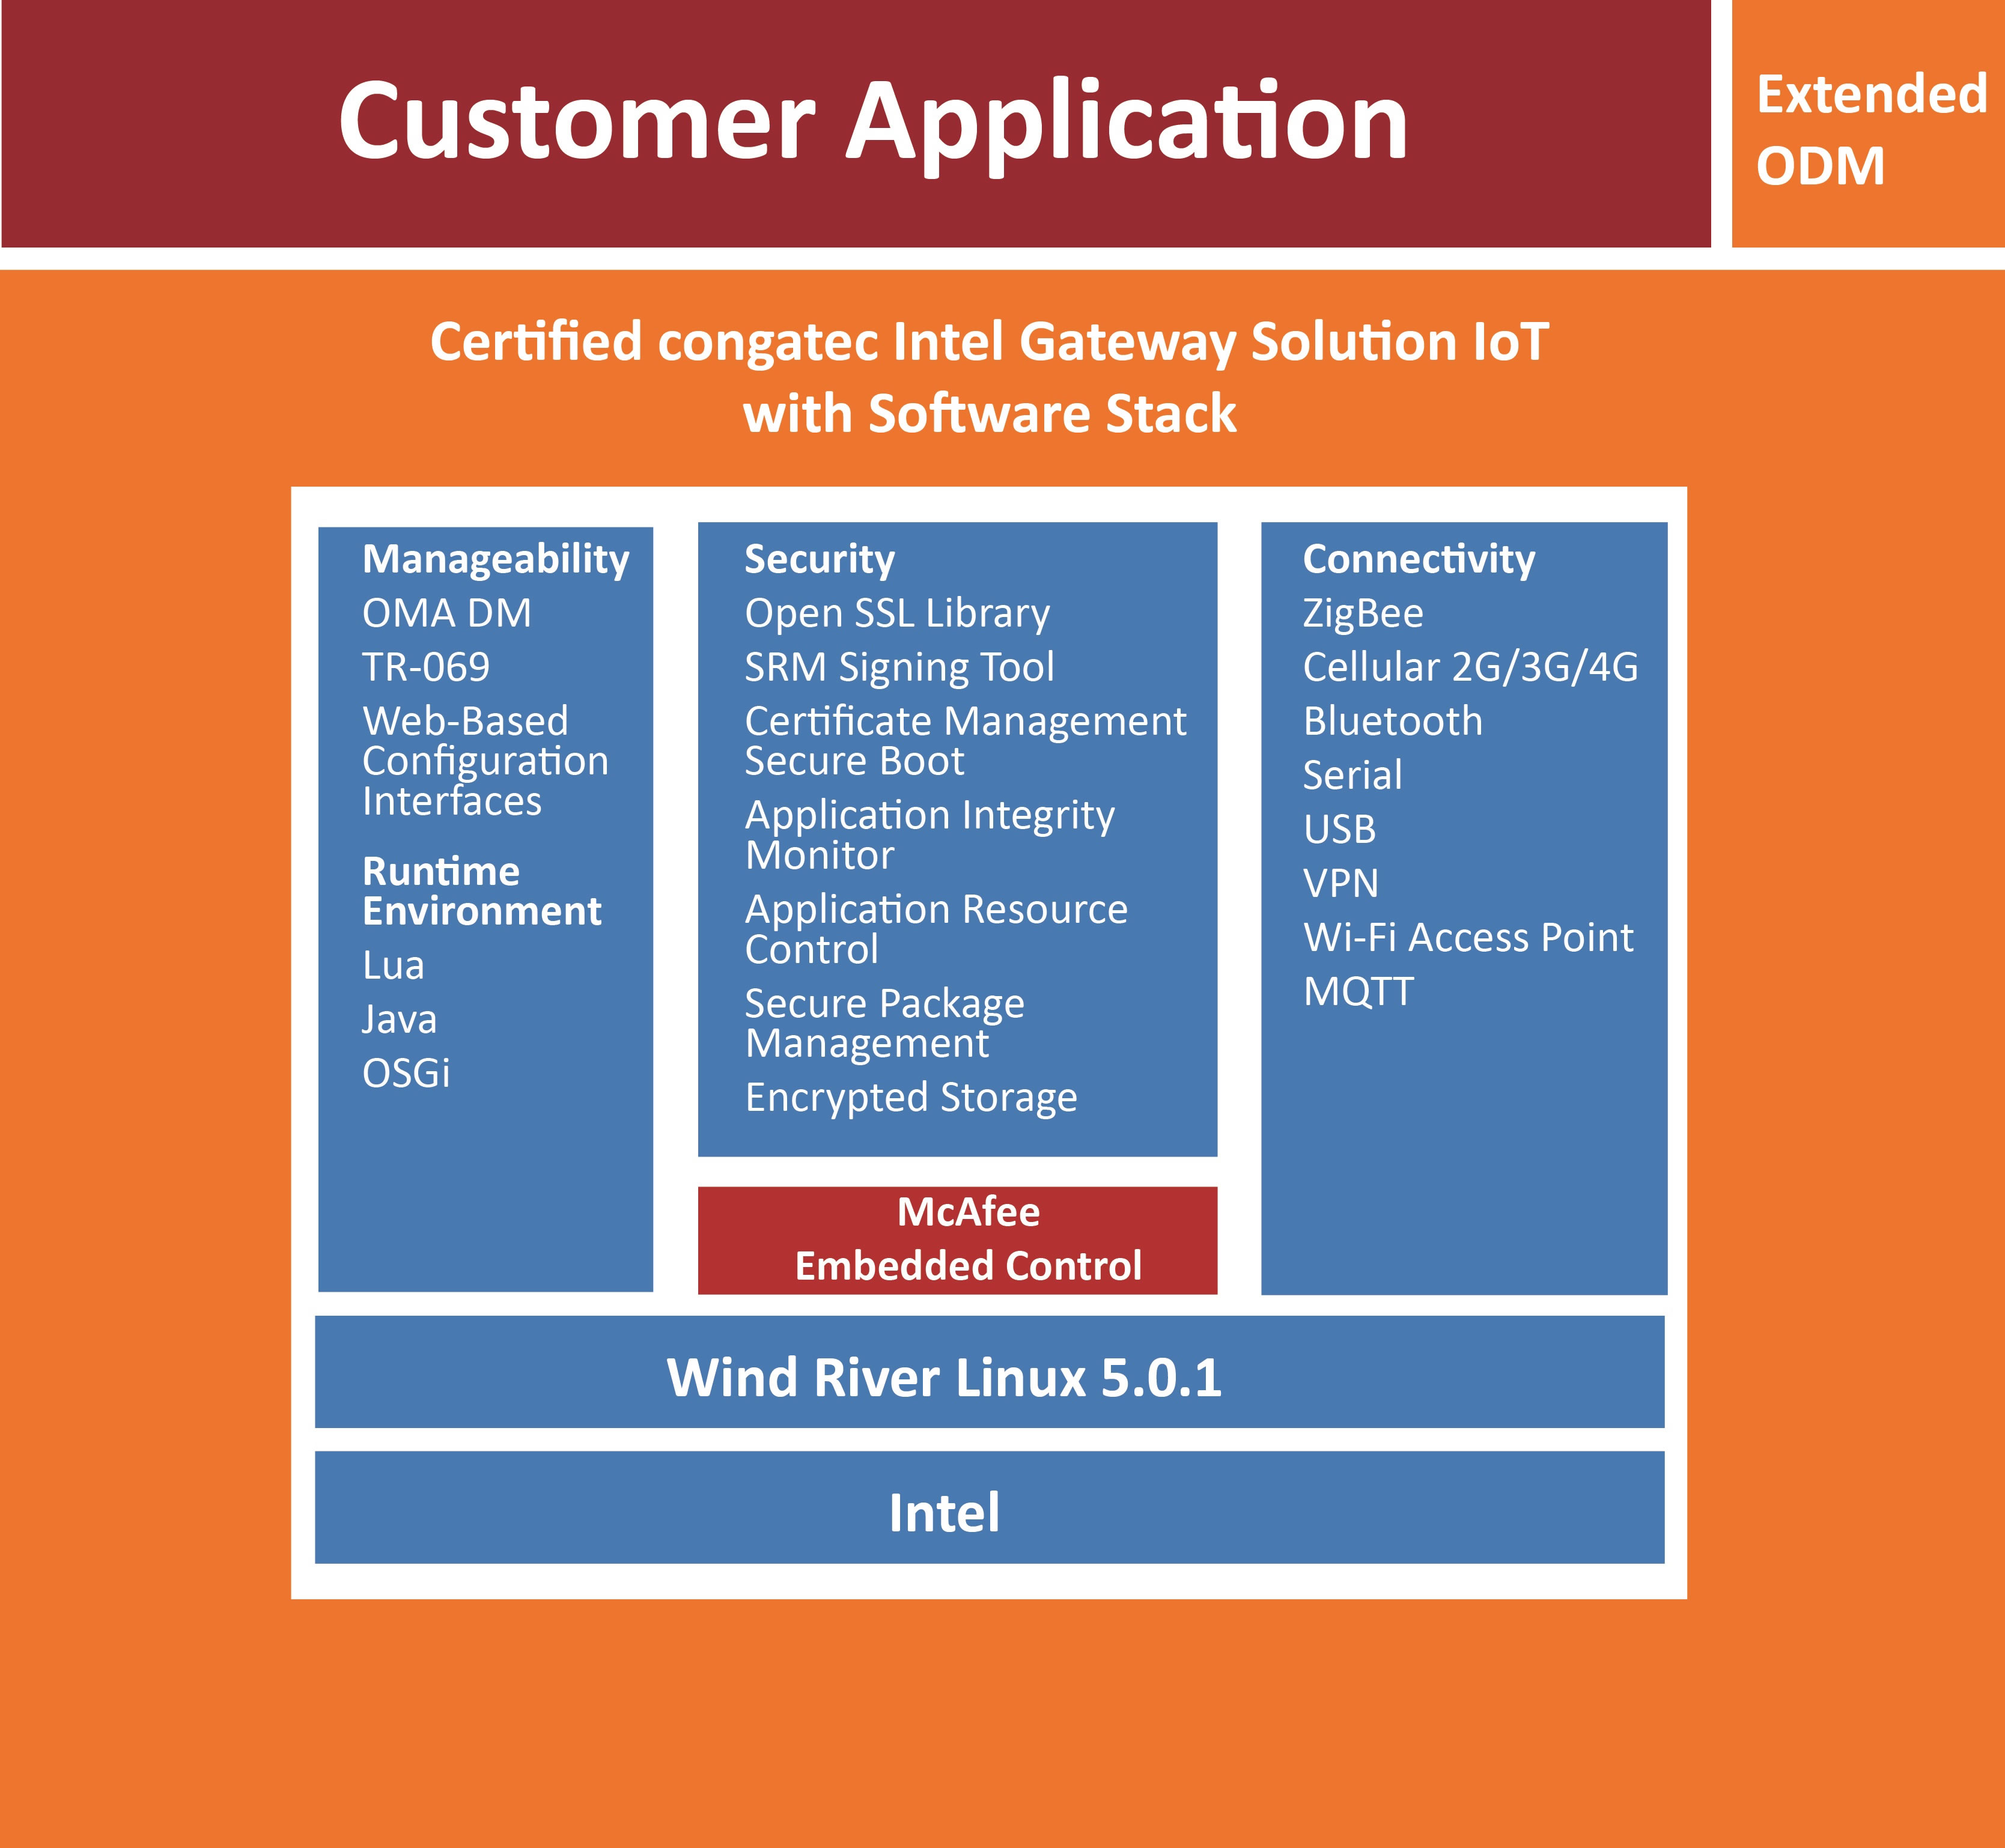 Figure 2 - congatec's certified Intel Gateway Solution for the IoT.